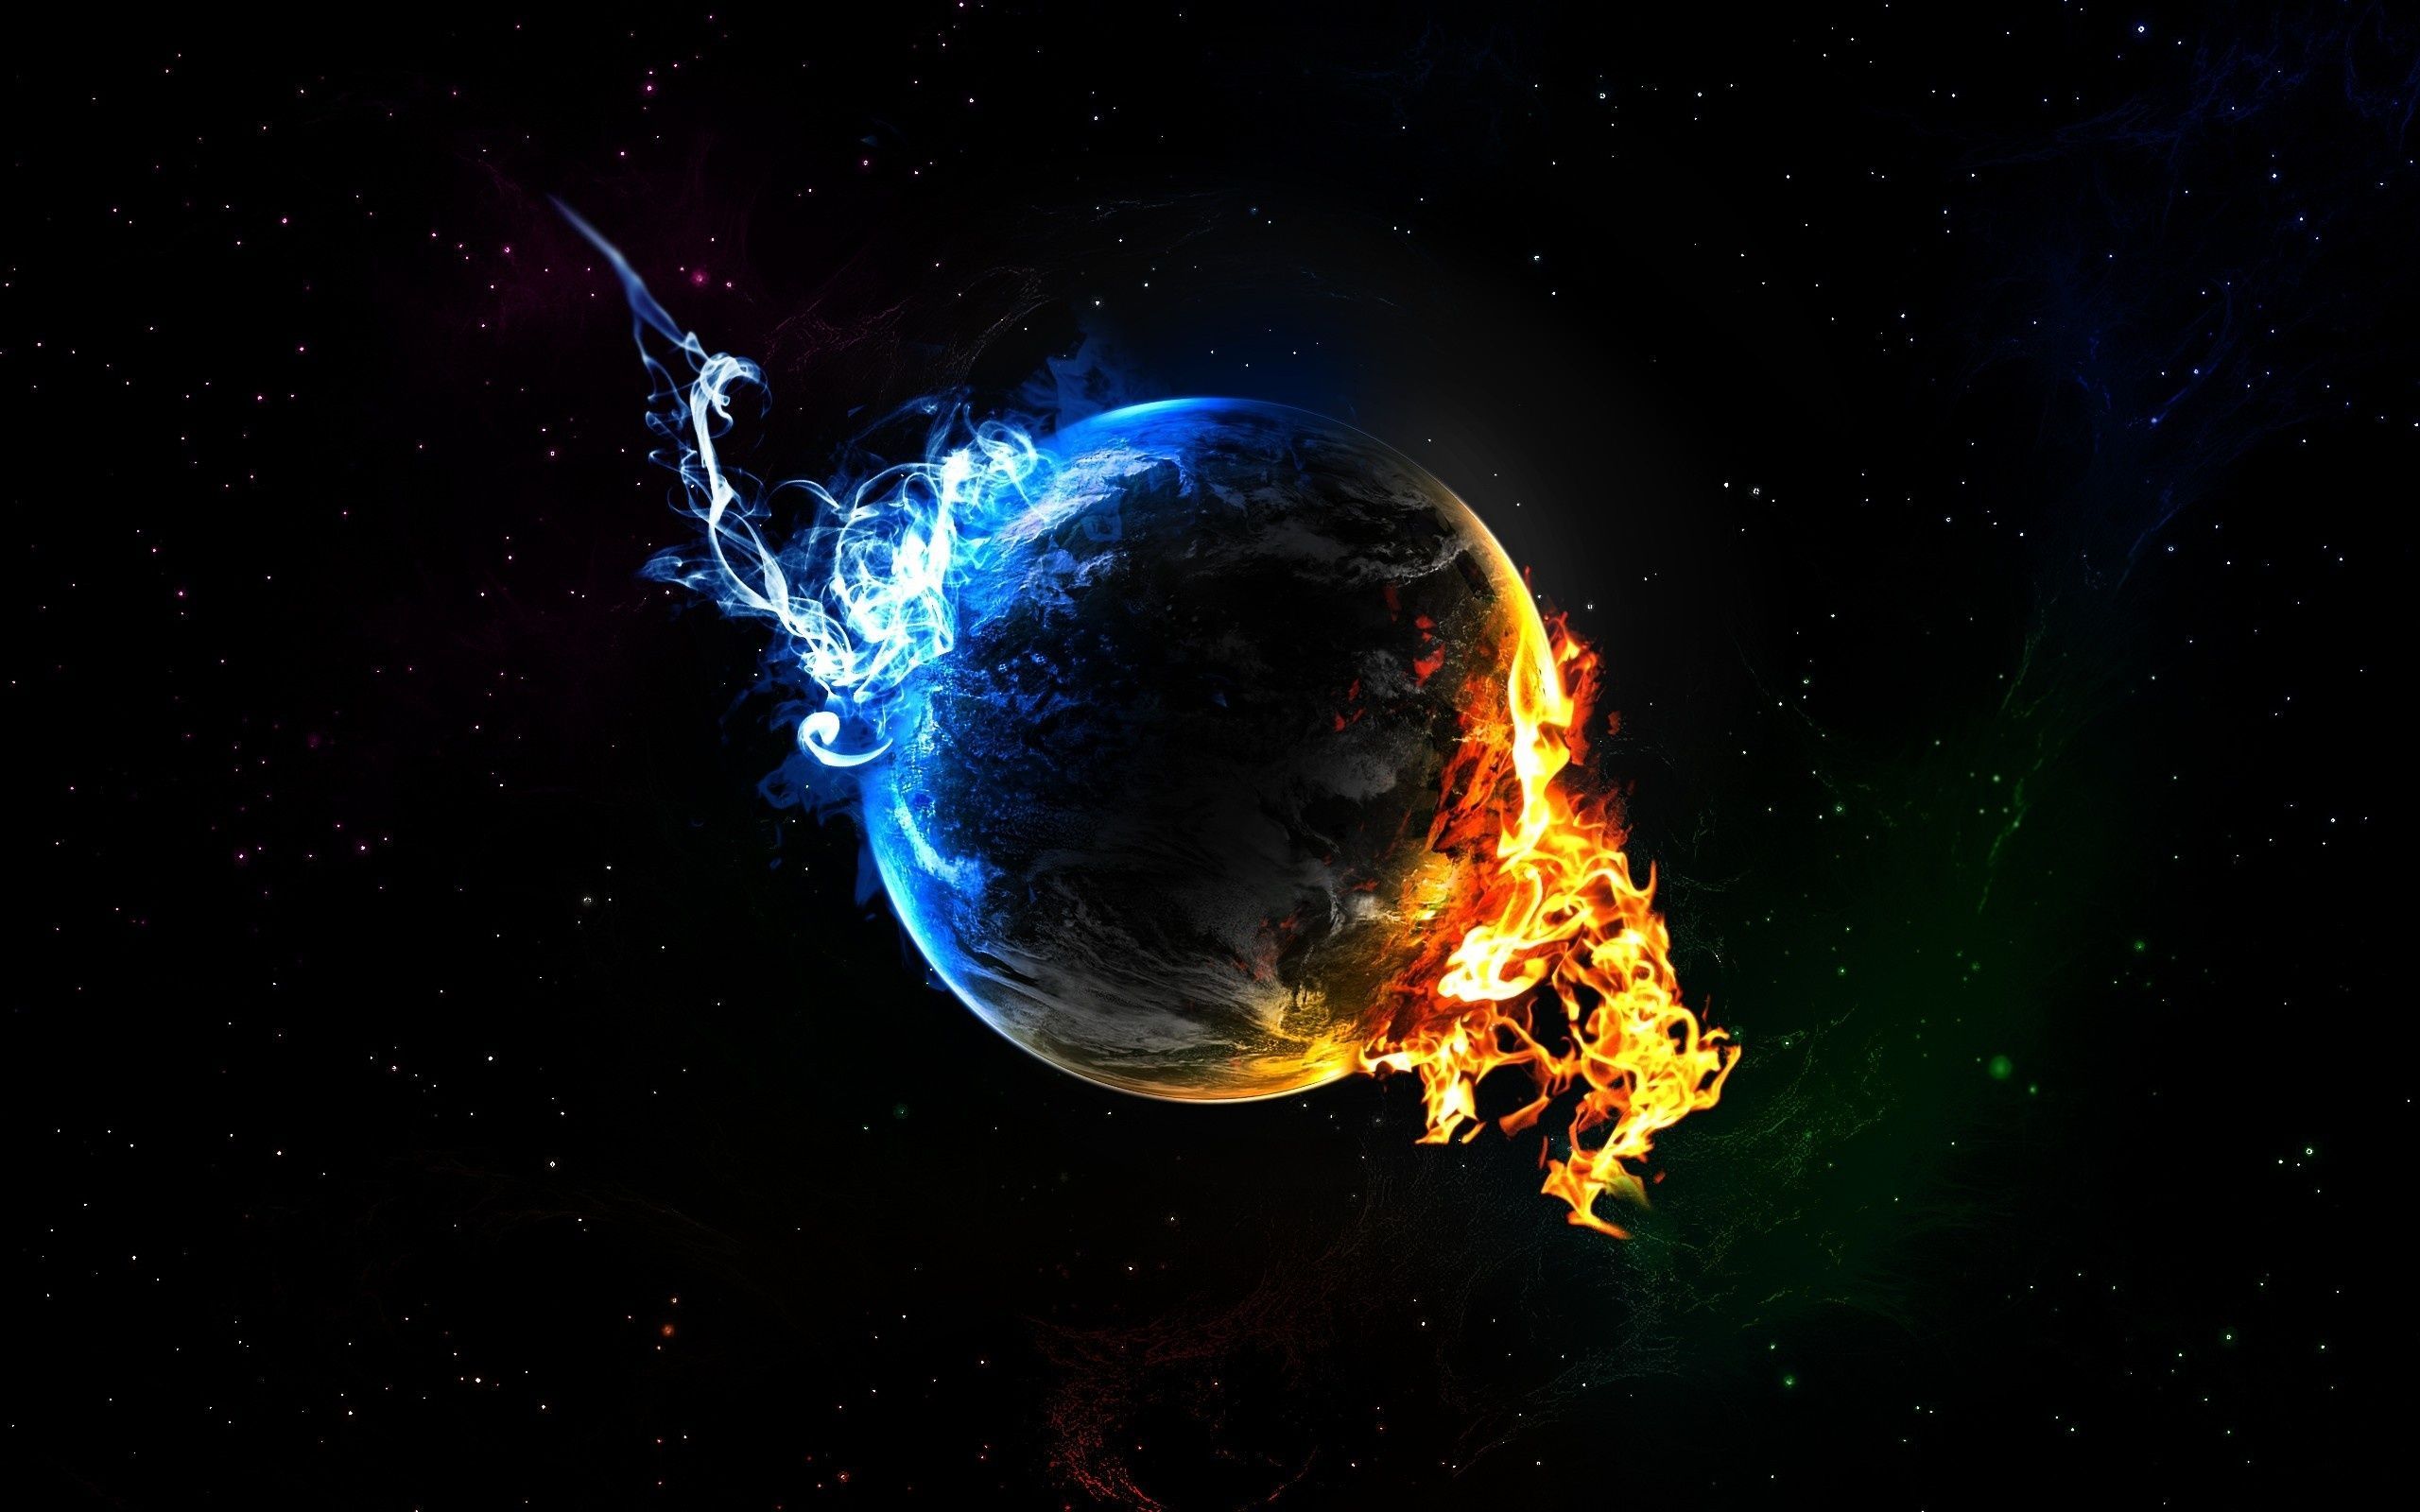 Cold And Hot Planet wallpaper by kyouko. RevelWallpaper.net